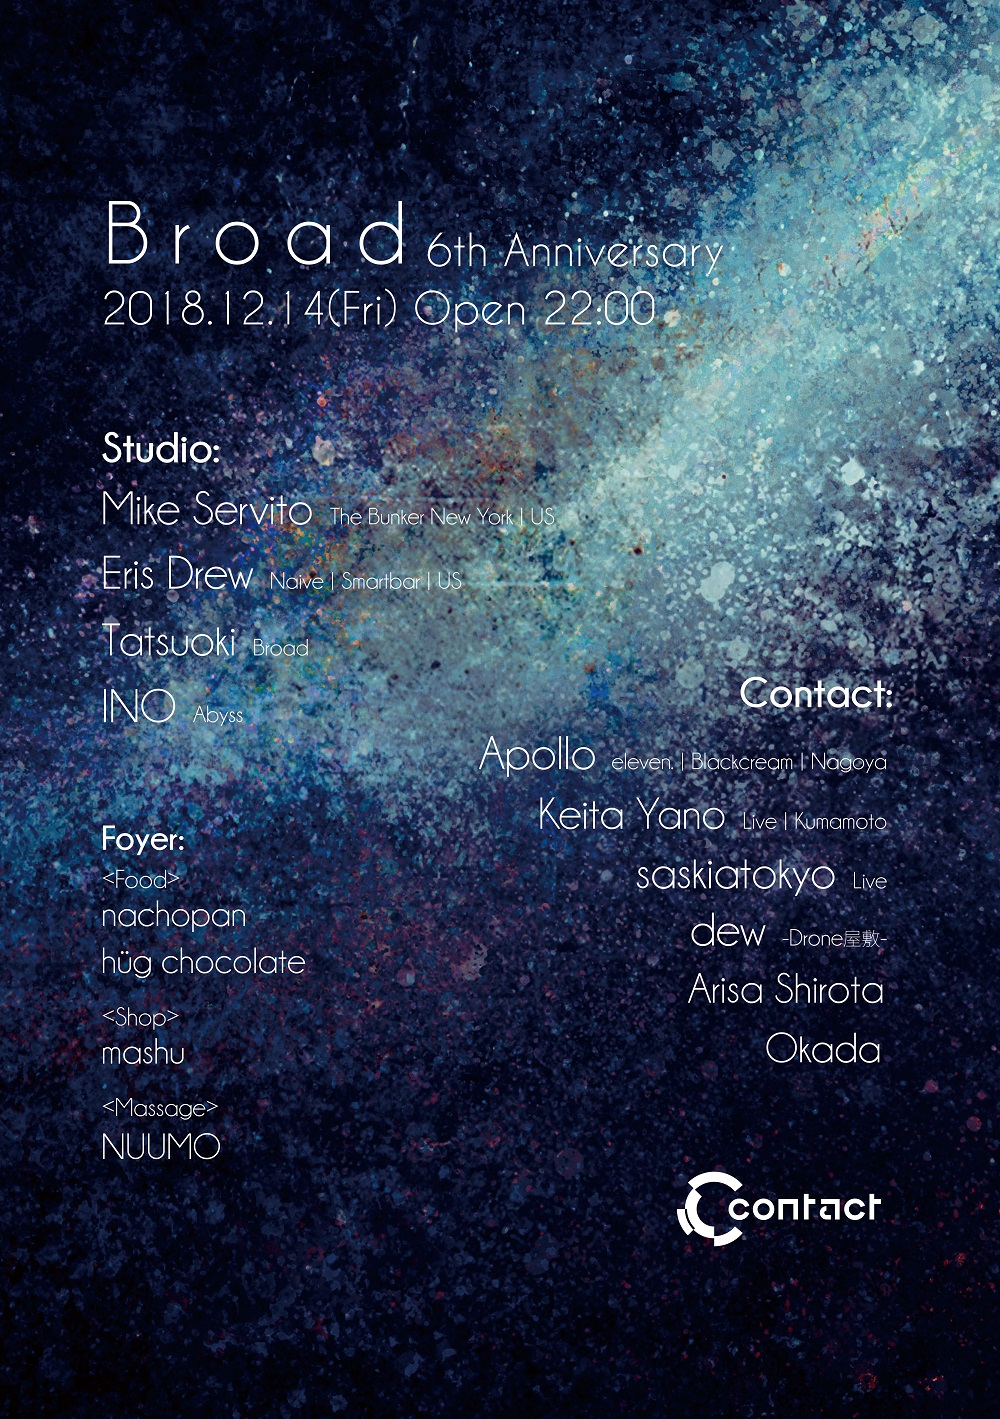 Broad 6th Anniversary feat. Mike Servito and Eris Drew